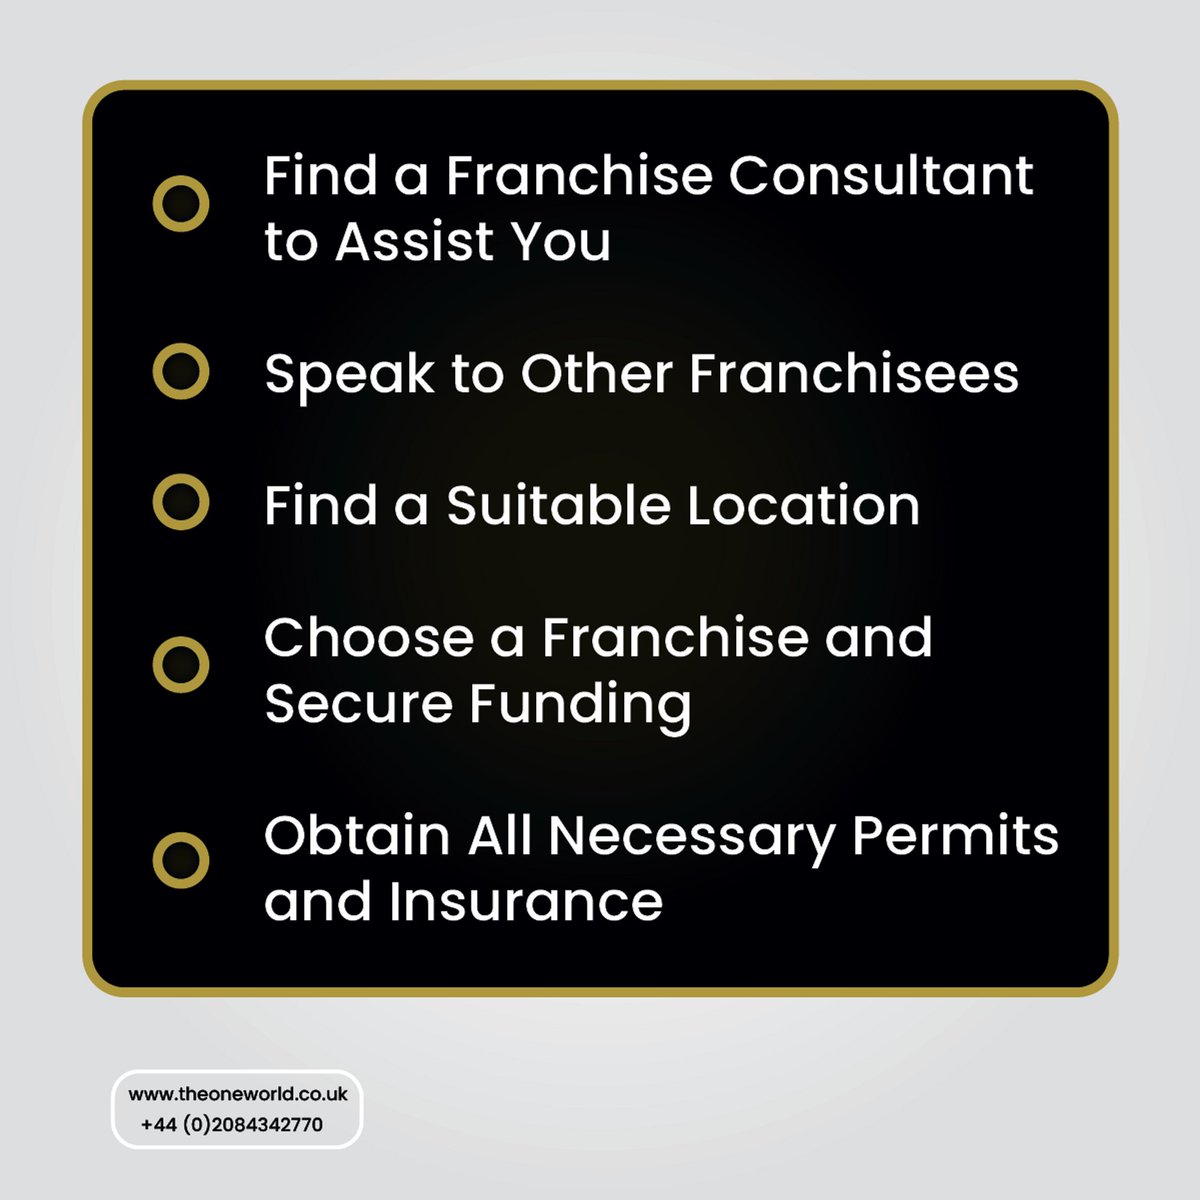 Opening a franchise in the UK is very rewarding when done correctly!
Get it right the first time and avoid making any mistakes by allowing us to walk you through the process 🤝
#franchisee  #franchising #franchiseopportunitie #franchisee #franchiseminuman #franchisemakanan #move